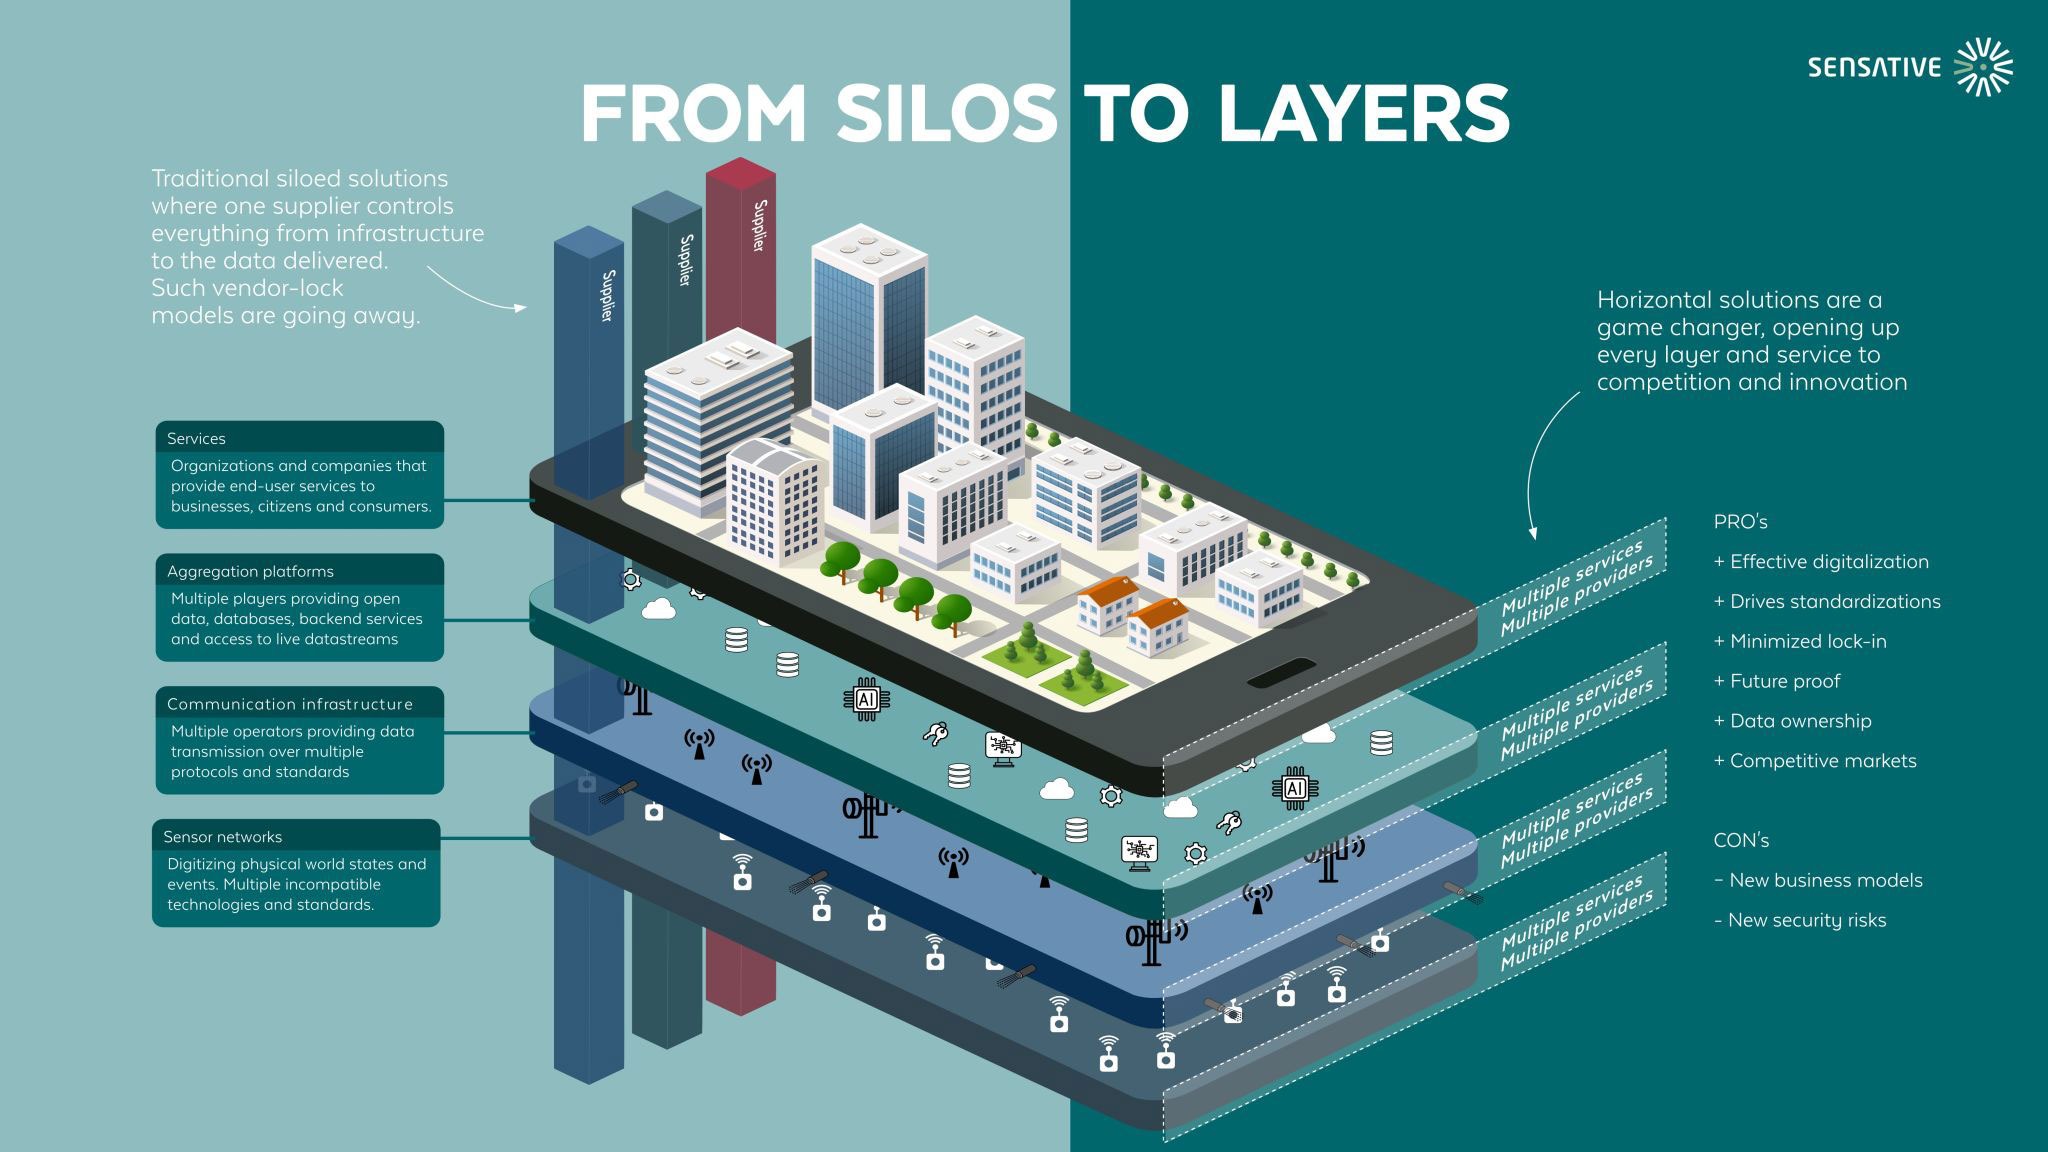 Advanced IoT technology is turning closed silos into open layers. Contact viridian automation for more information